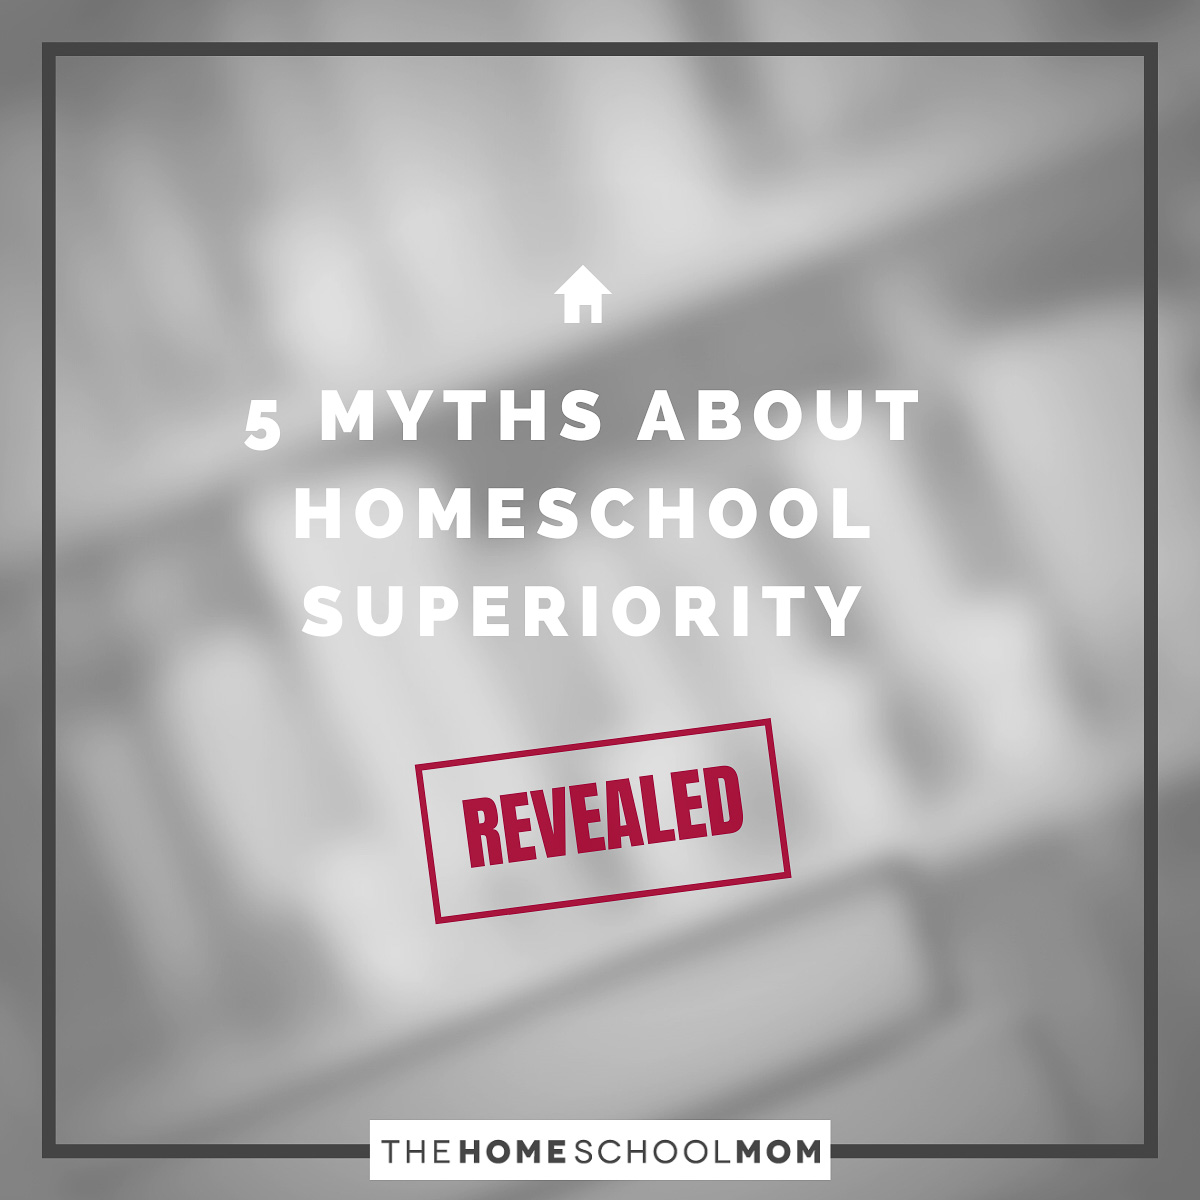 5 myths about homeschool superiority revealed - TheHomeSchoolMom